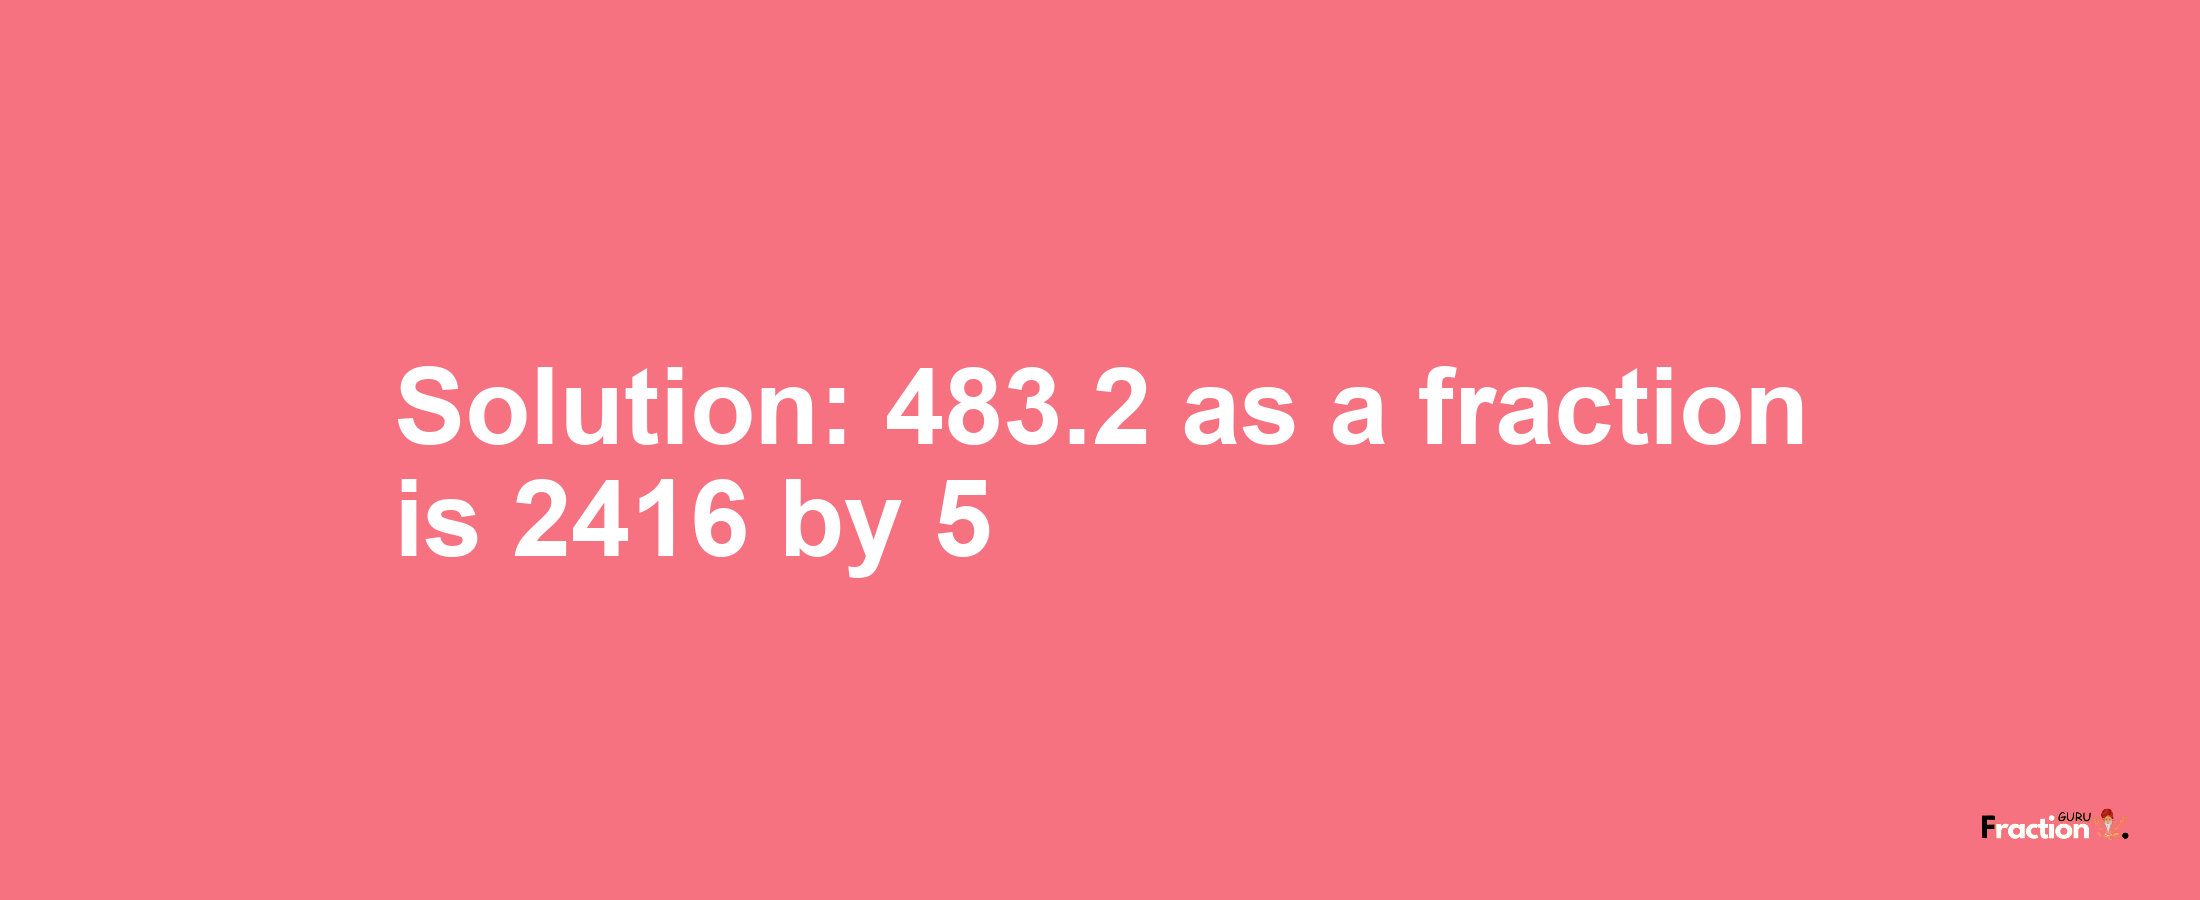 Solution:483.2 as a fraction is 2416/5